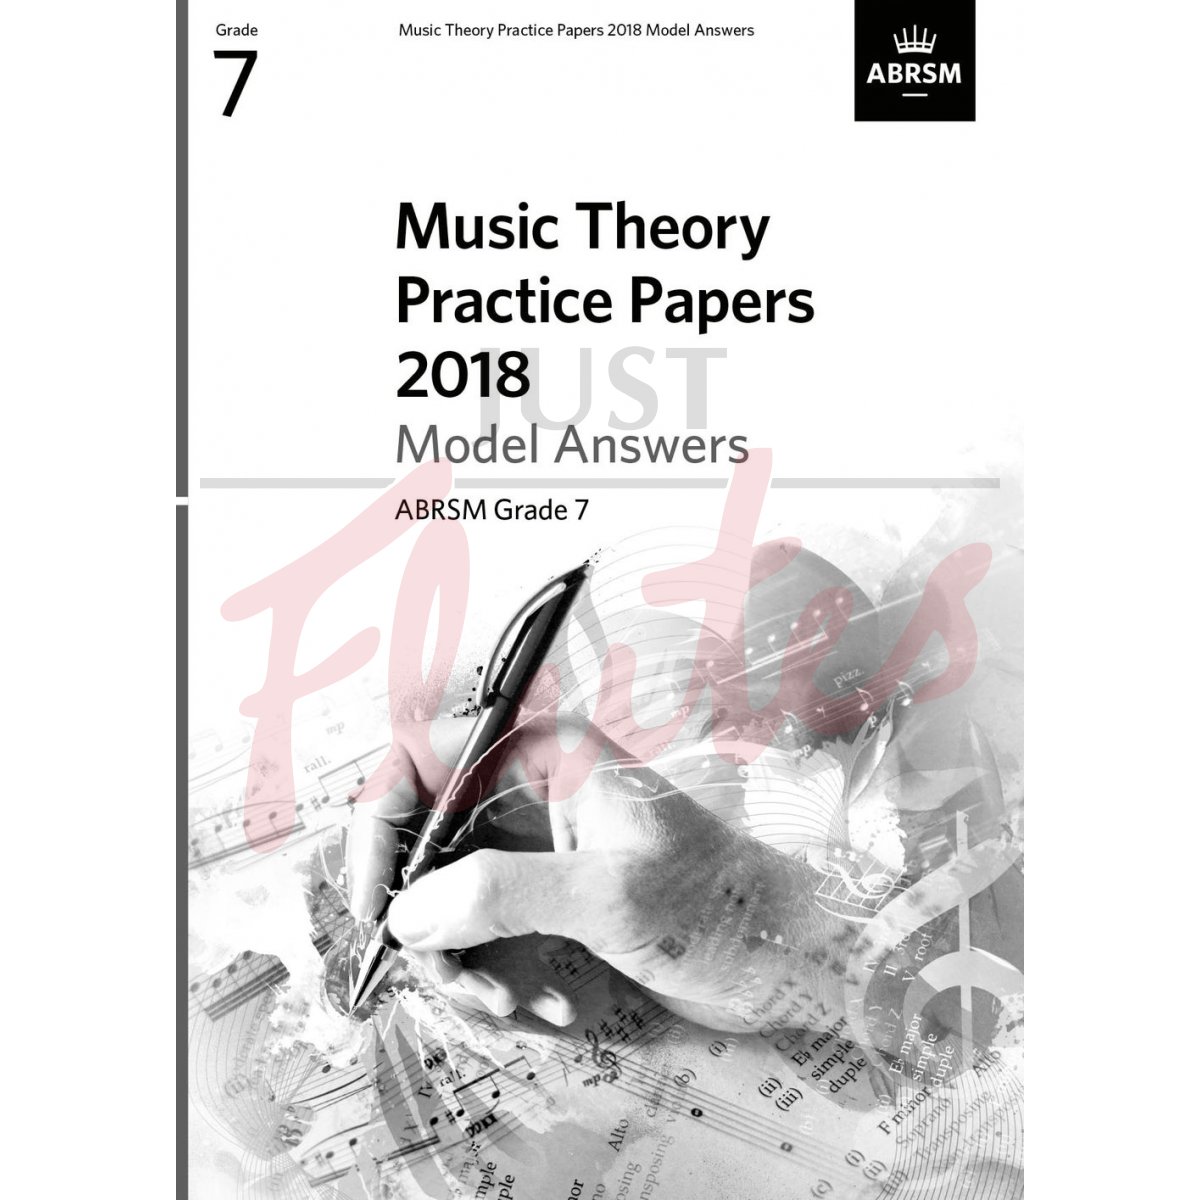 Music Theory Practice Papers 2018 Grade 7 - Model Answers